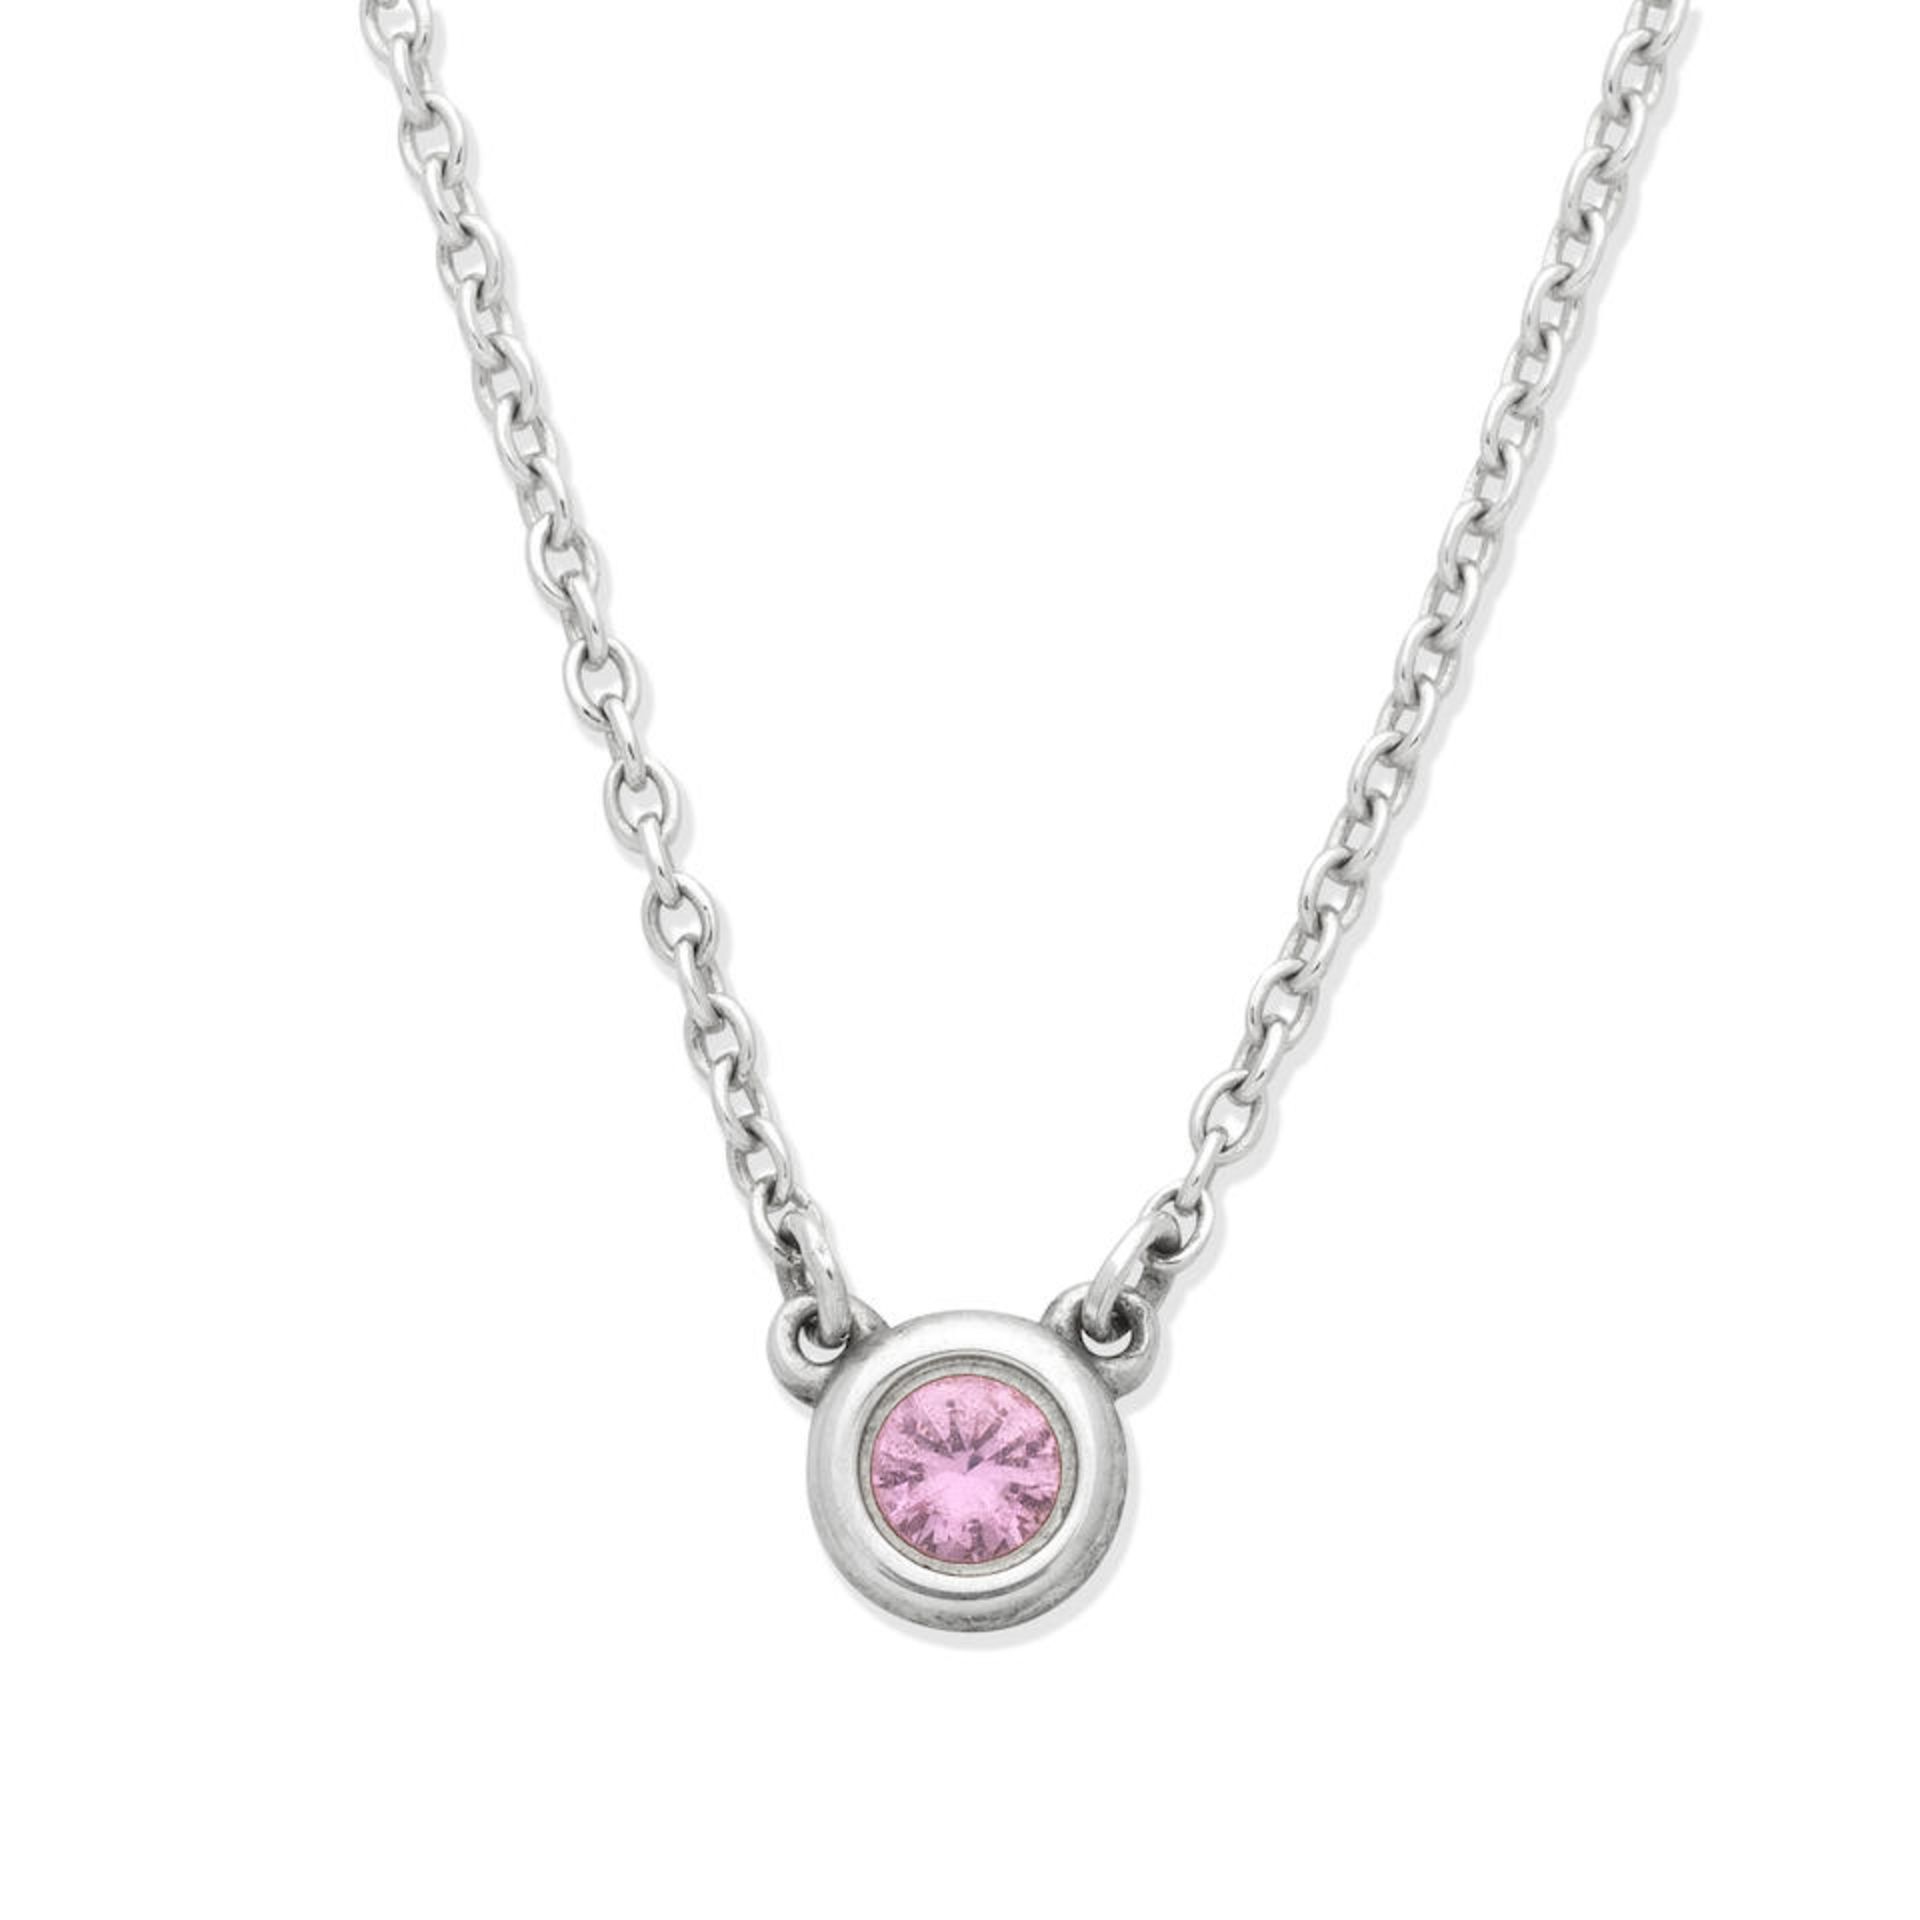 Elsa Peretti for Tiffany & Co.: a Pink Sapphire and Sterling Silver Color by the Yard Pendant Ne...